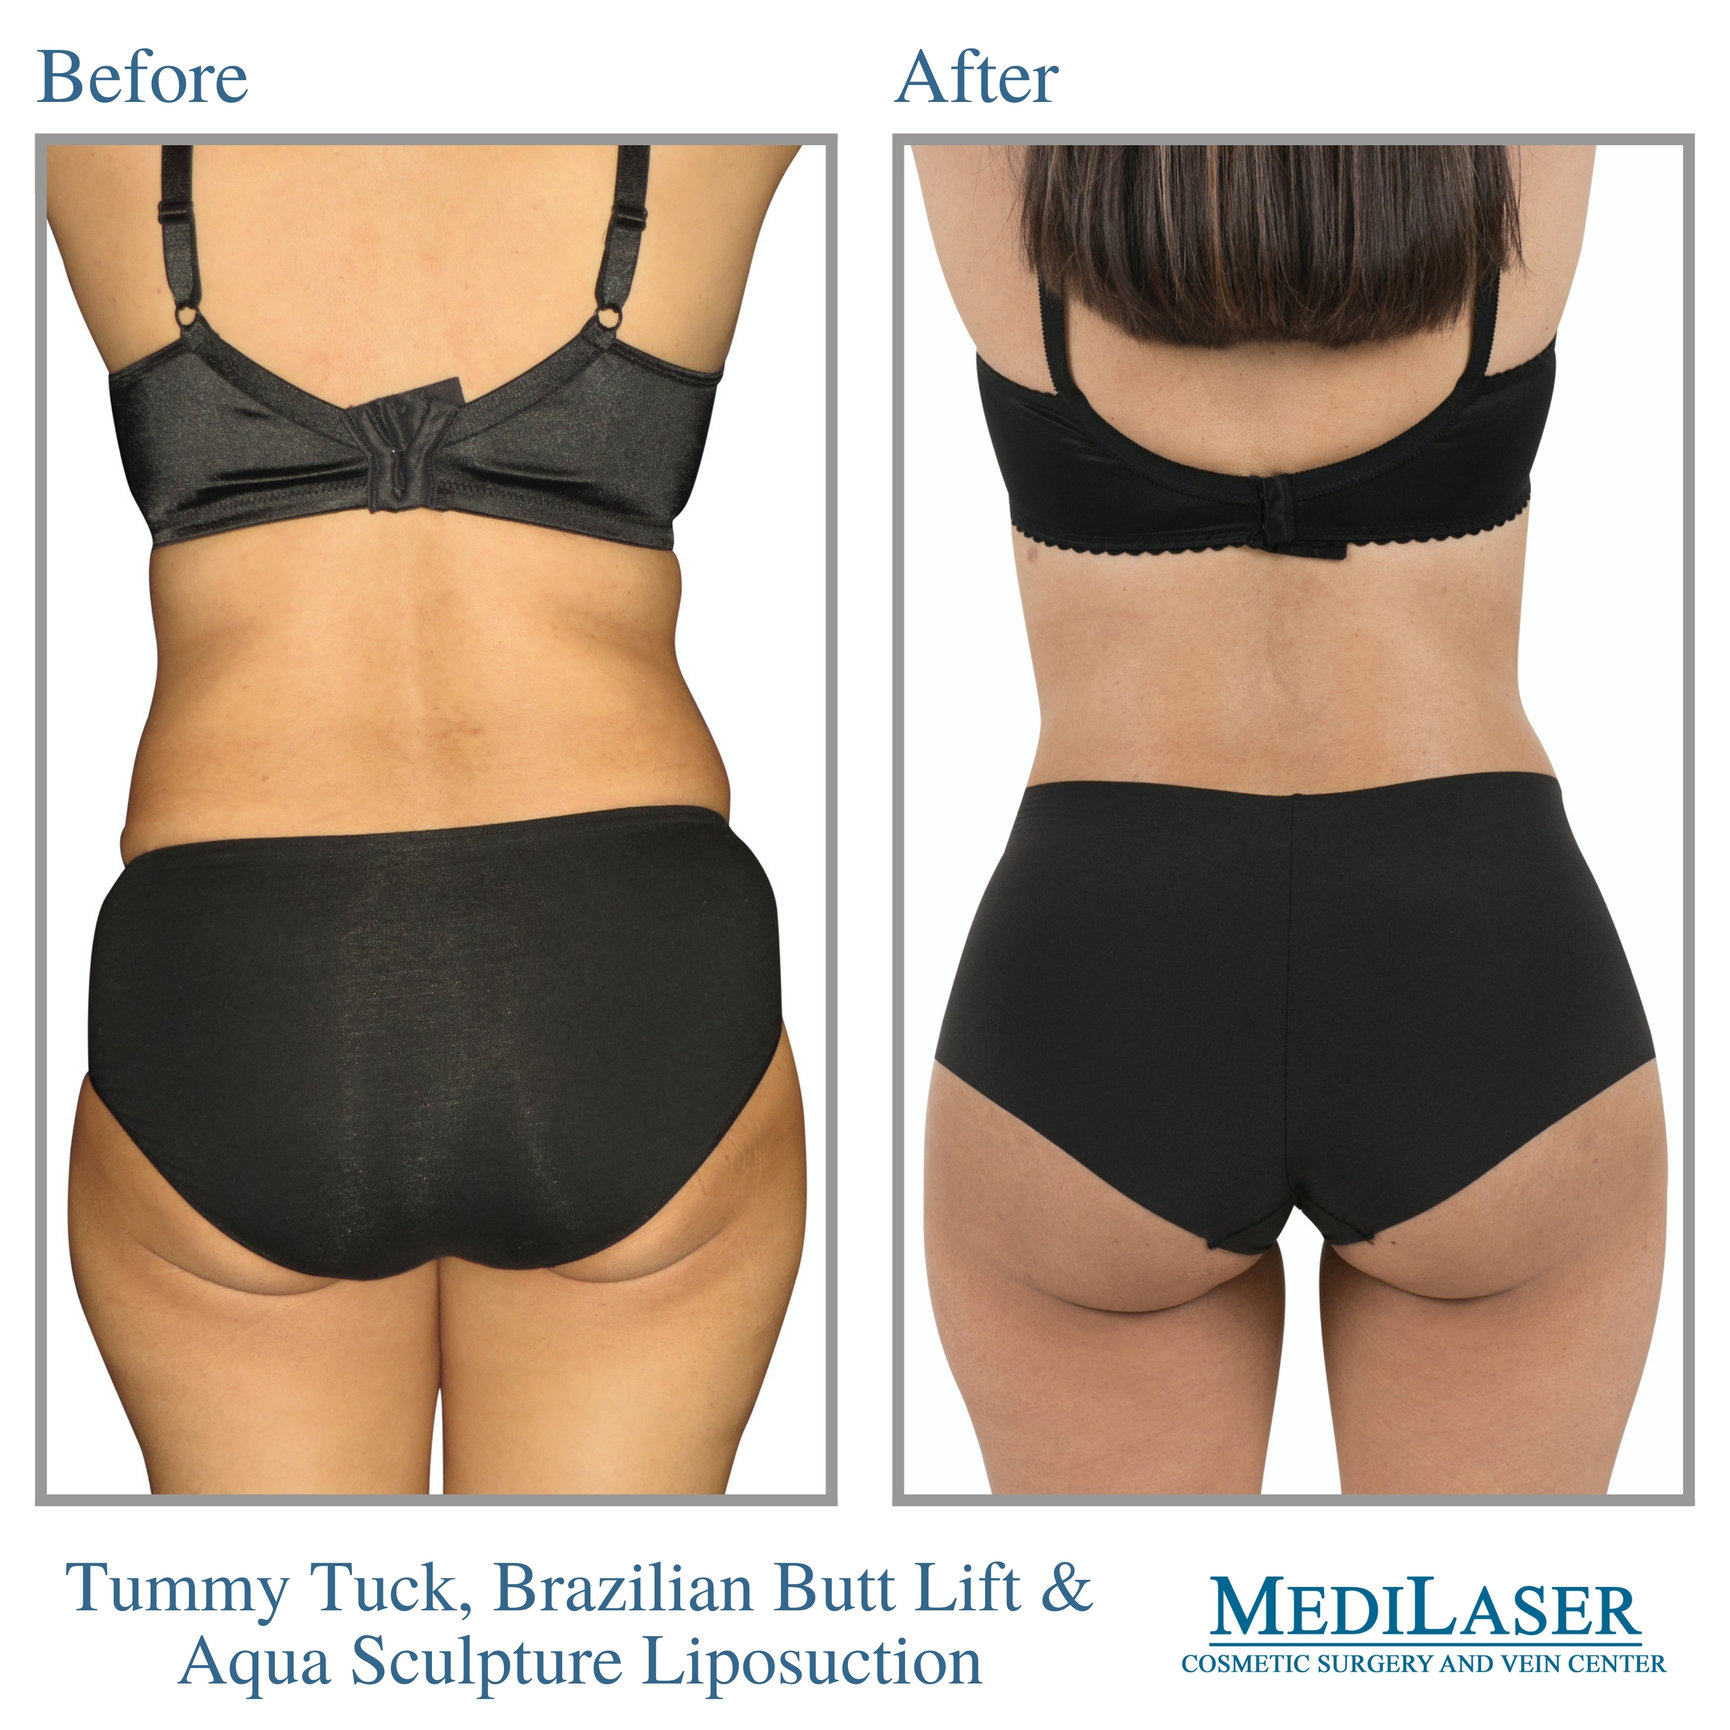 Aqua Sculpture Liposuction and Tummy Tuck Before and After - Medilaser  Surgery and Vein Center